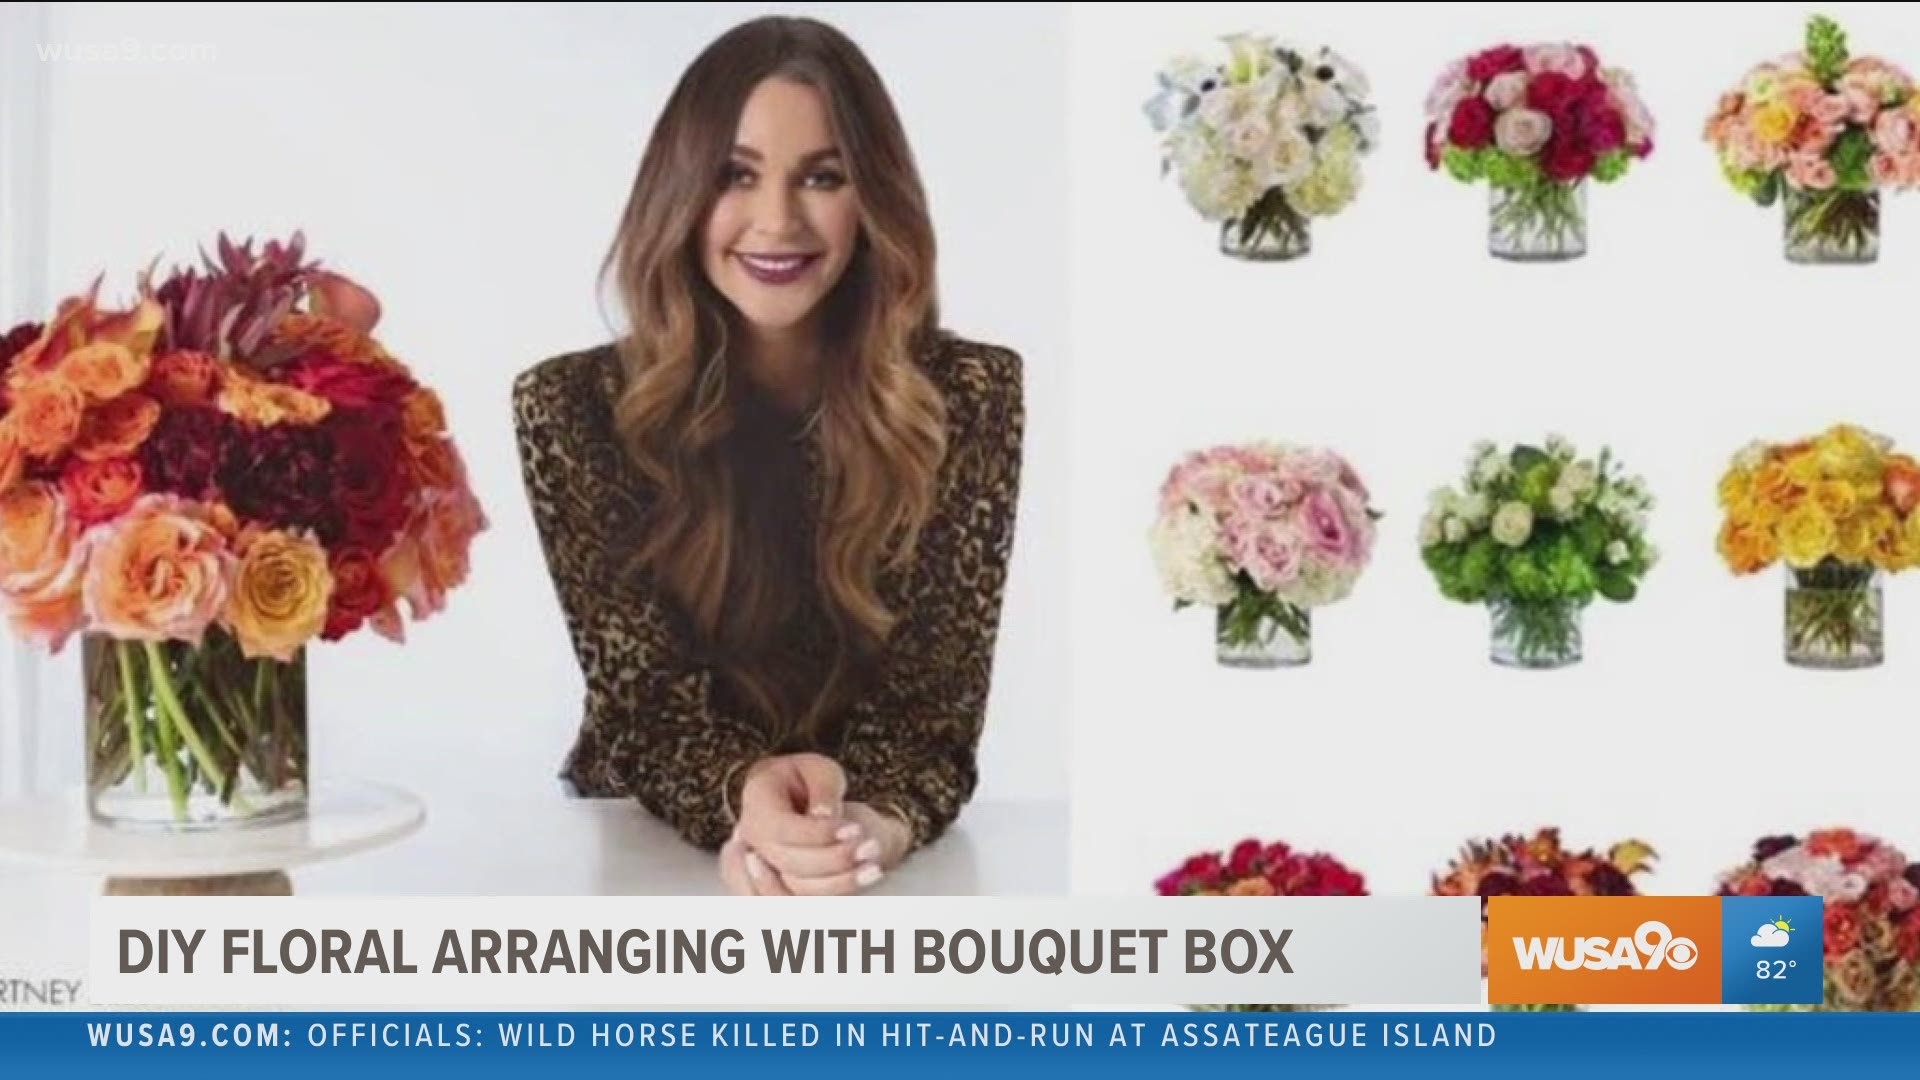 Courtney Sixx shares a new and fun way to find your inner florist with the Bouquet Box subscription delivery.